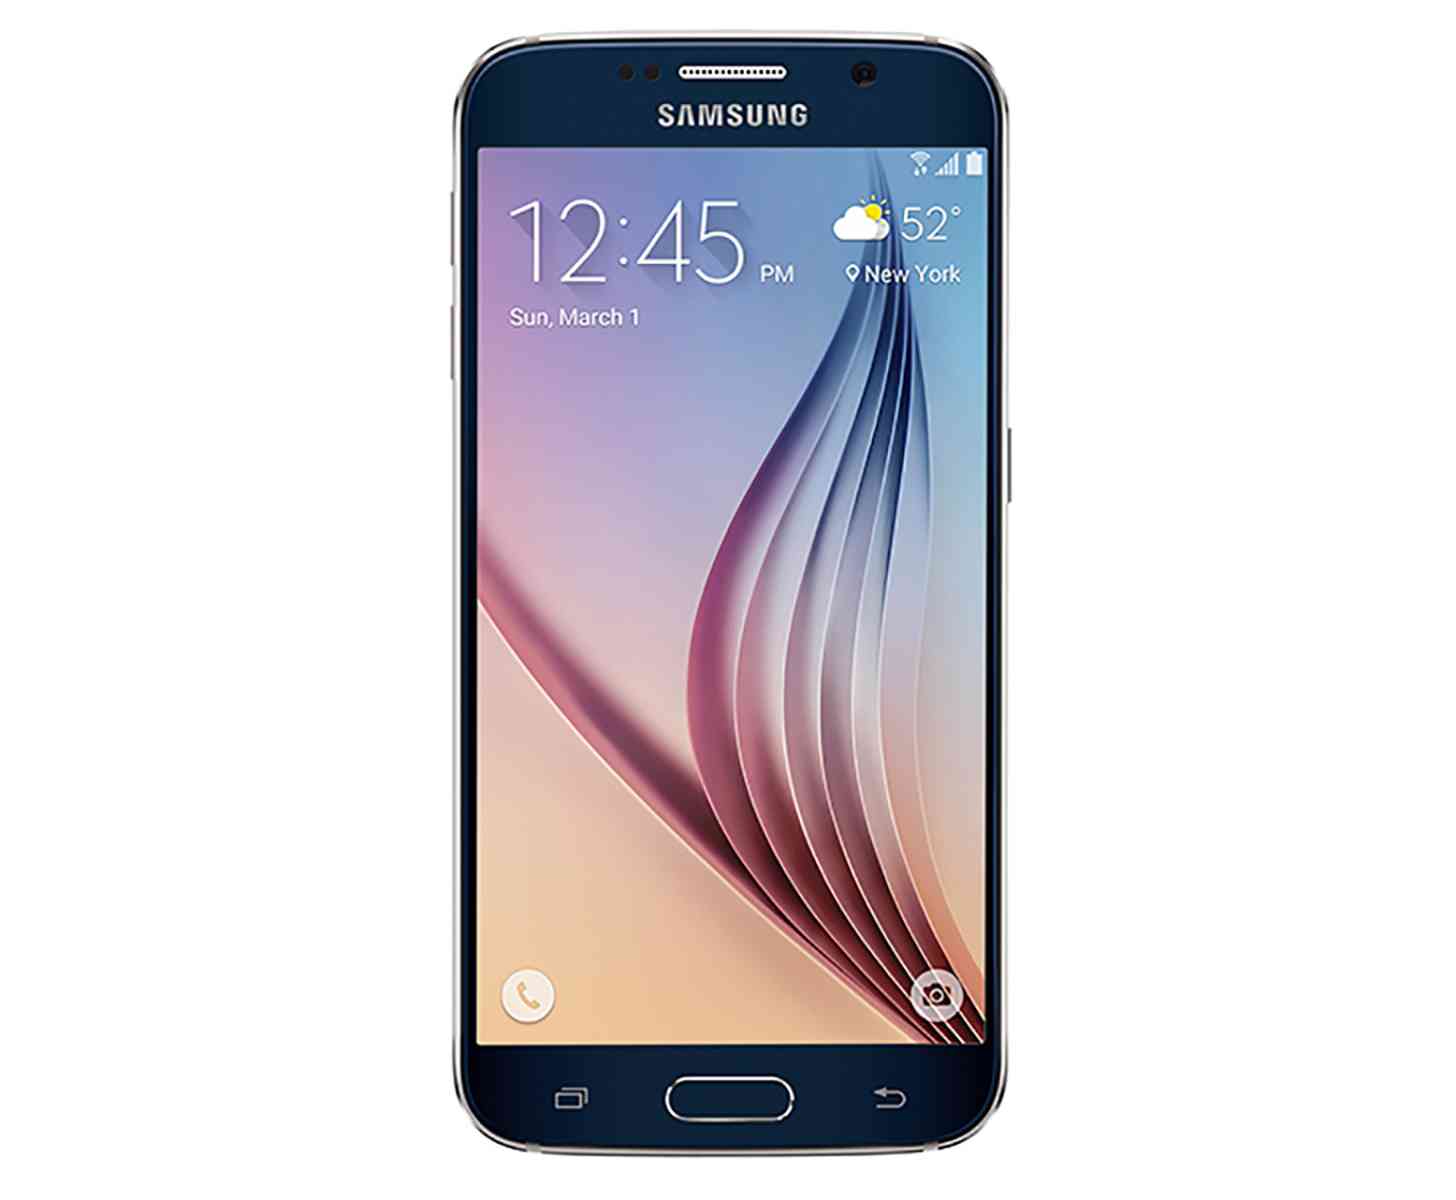 Samsung Galaxy S6 official large